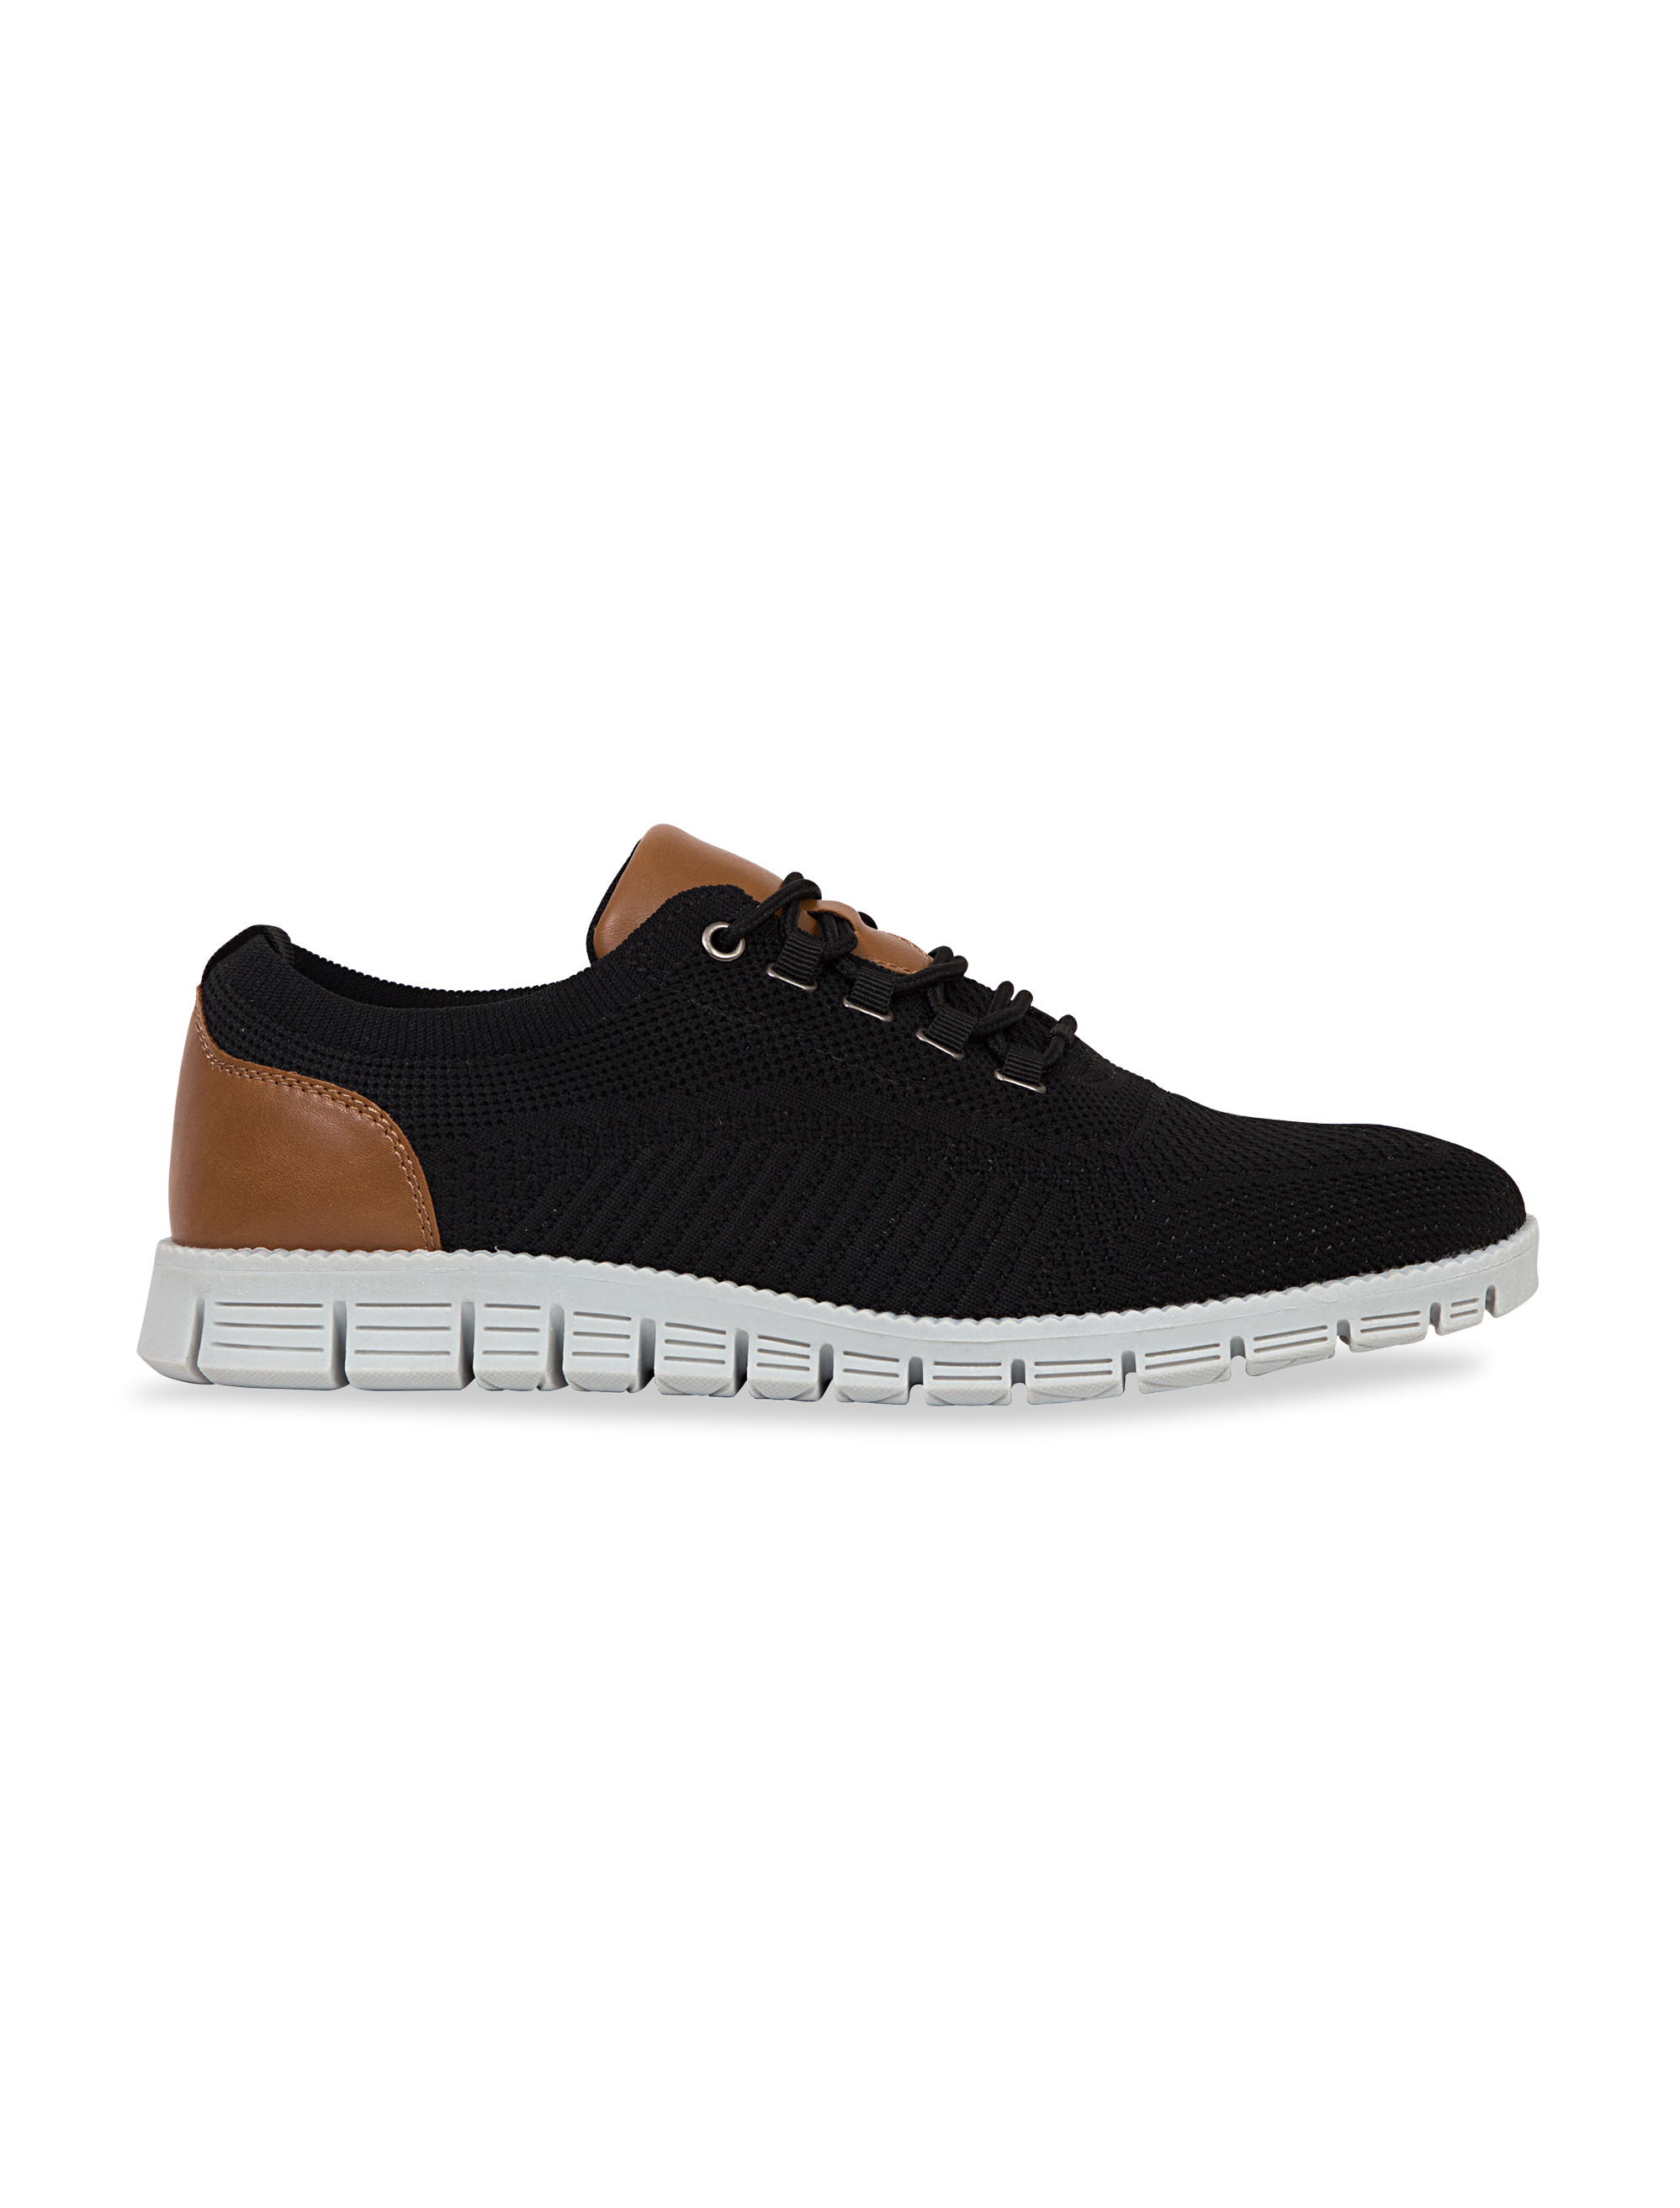 Deer Stags Knit Lace Sneakers